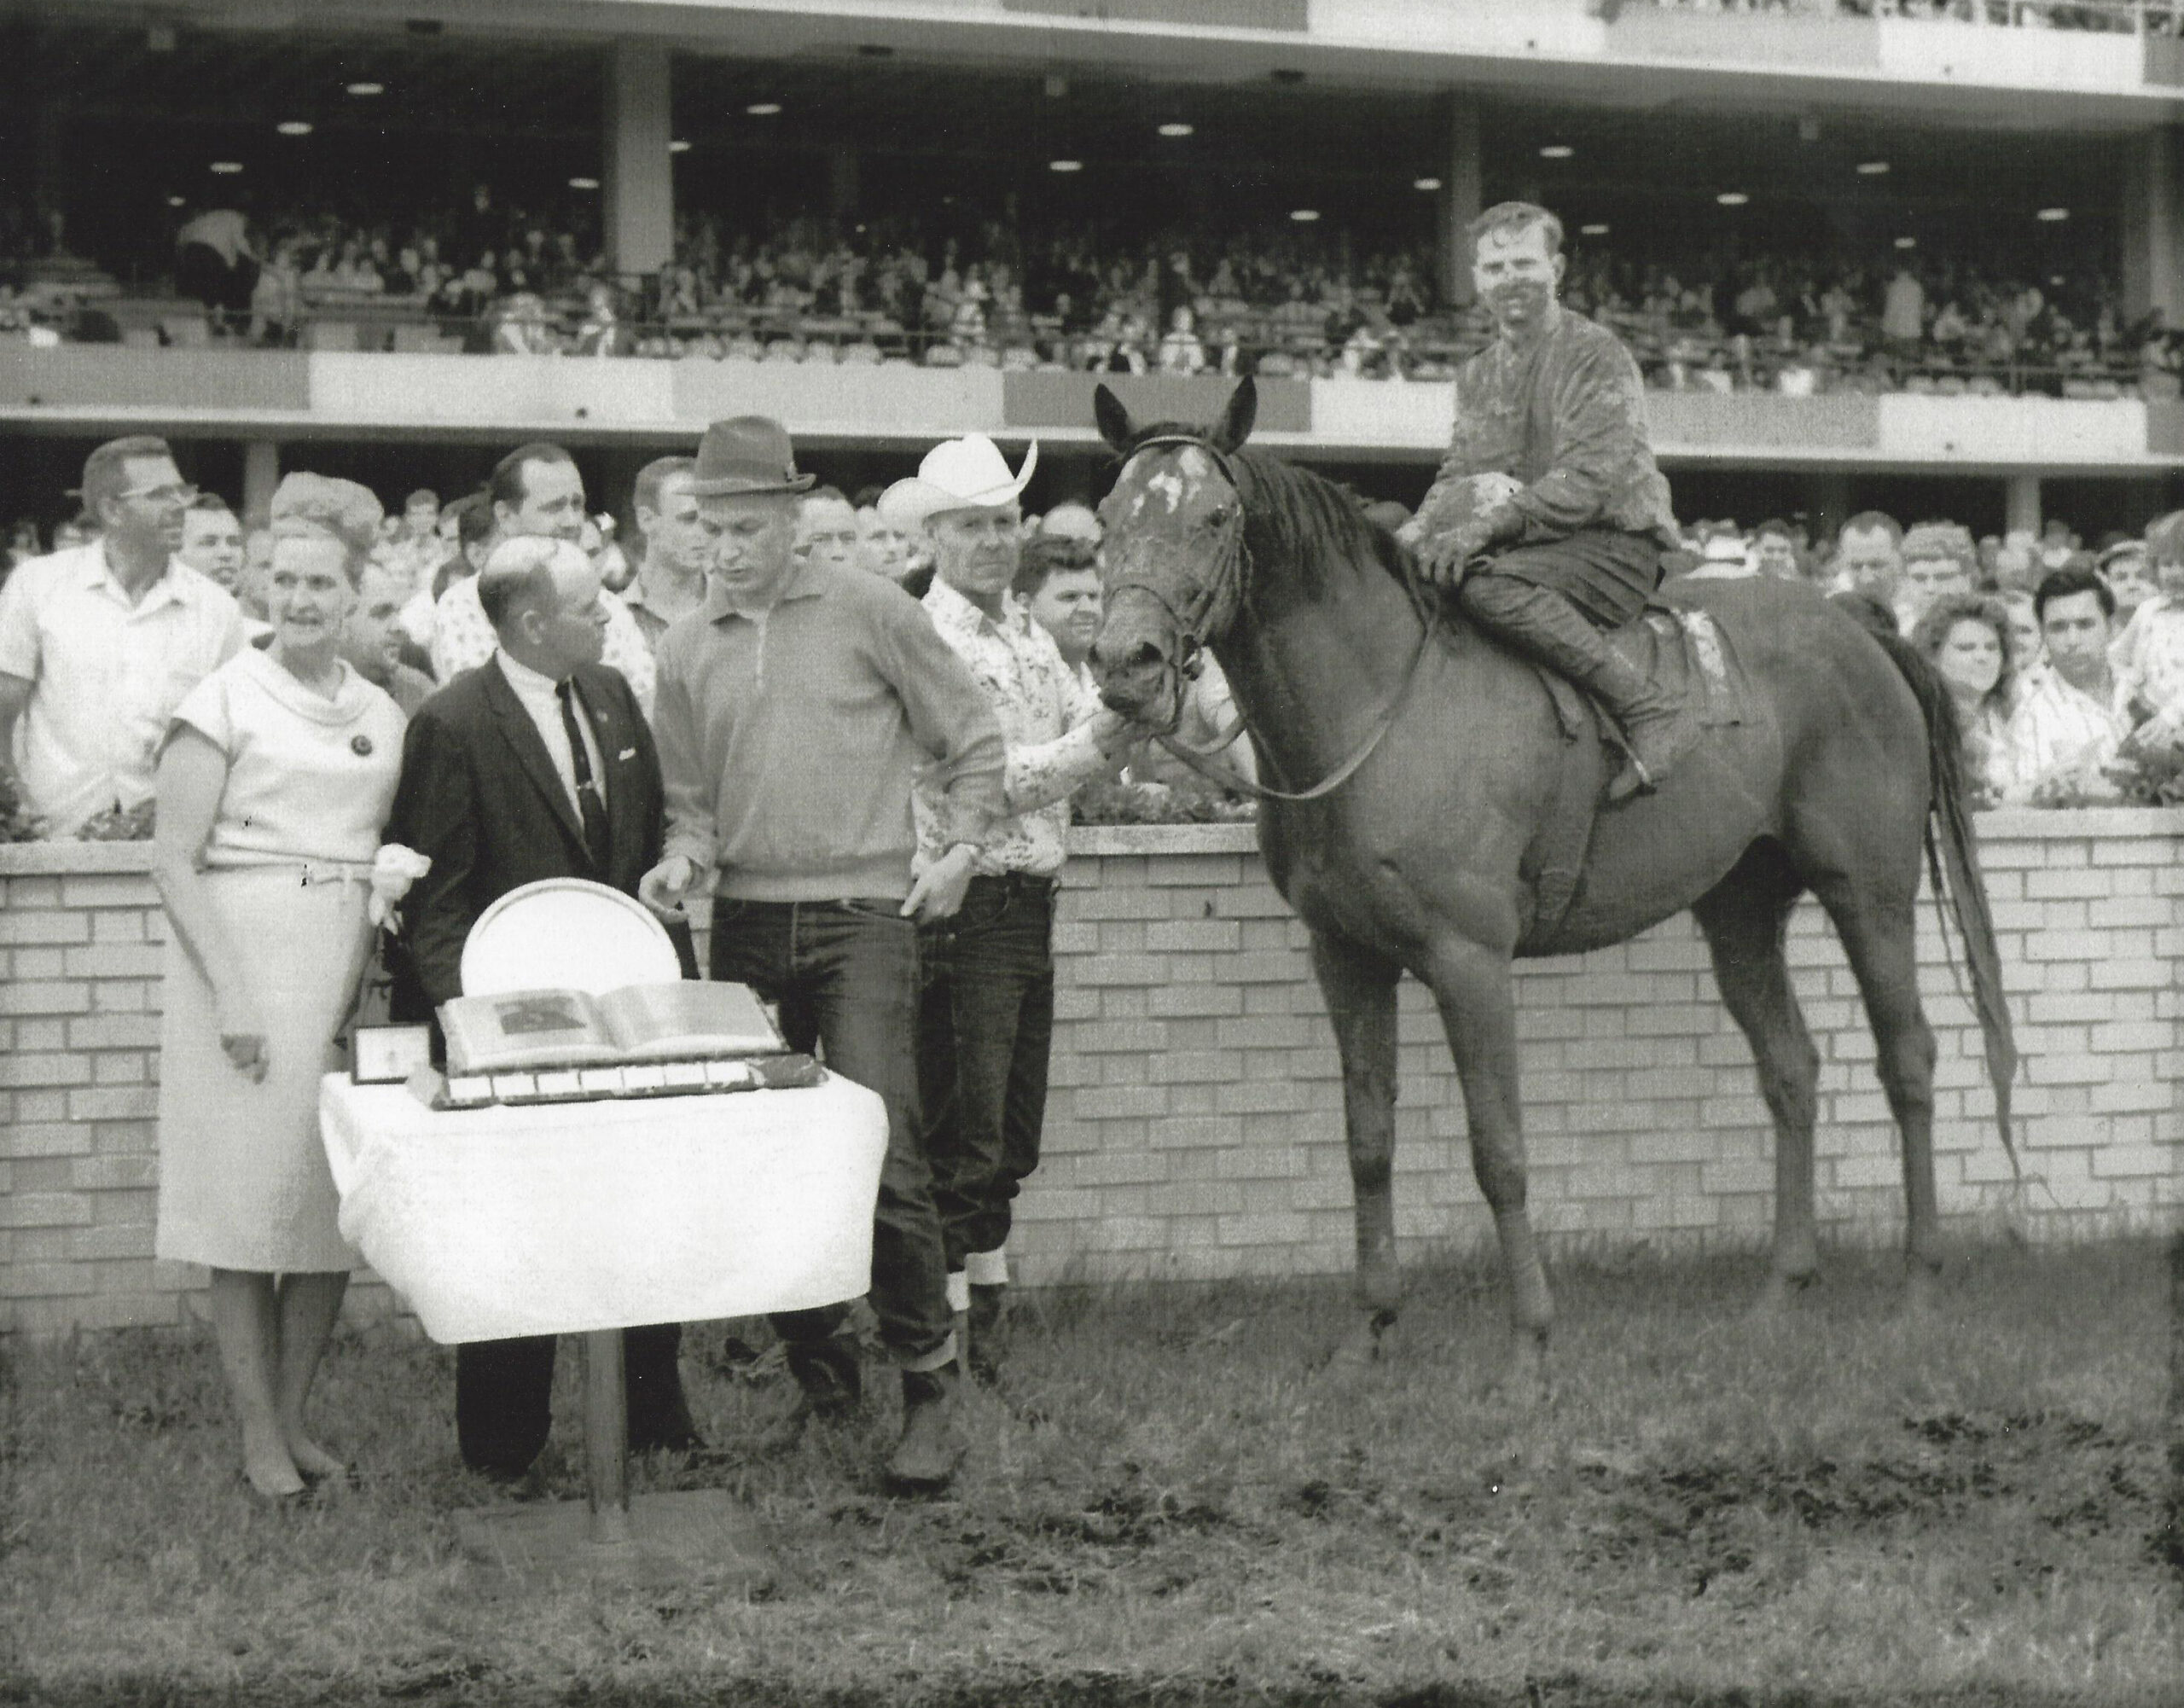  Cosmic Tip. Speers Handicap 1966. Harry Jeffrey presenting to trainer Gary Danelson. Gary's father holding the horse. Roger Jensen in he saddle.